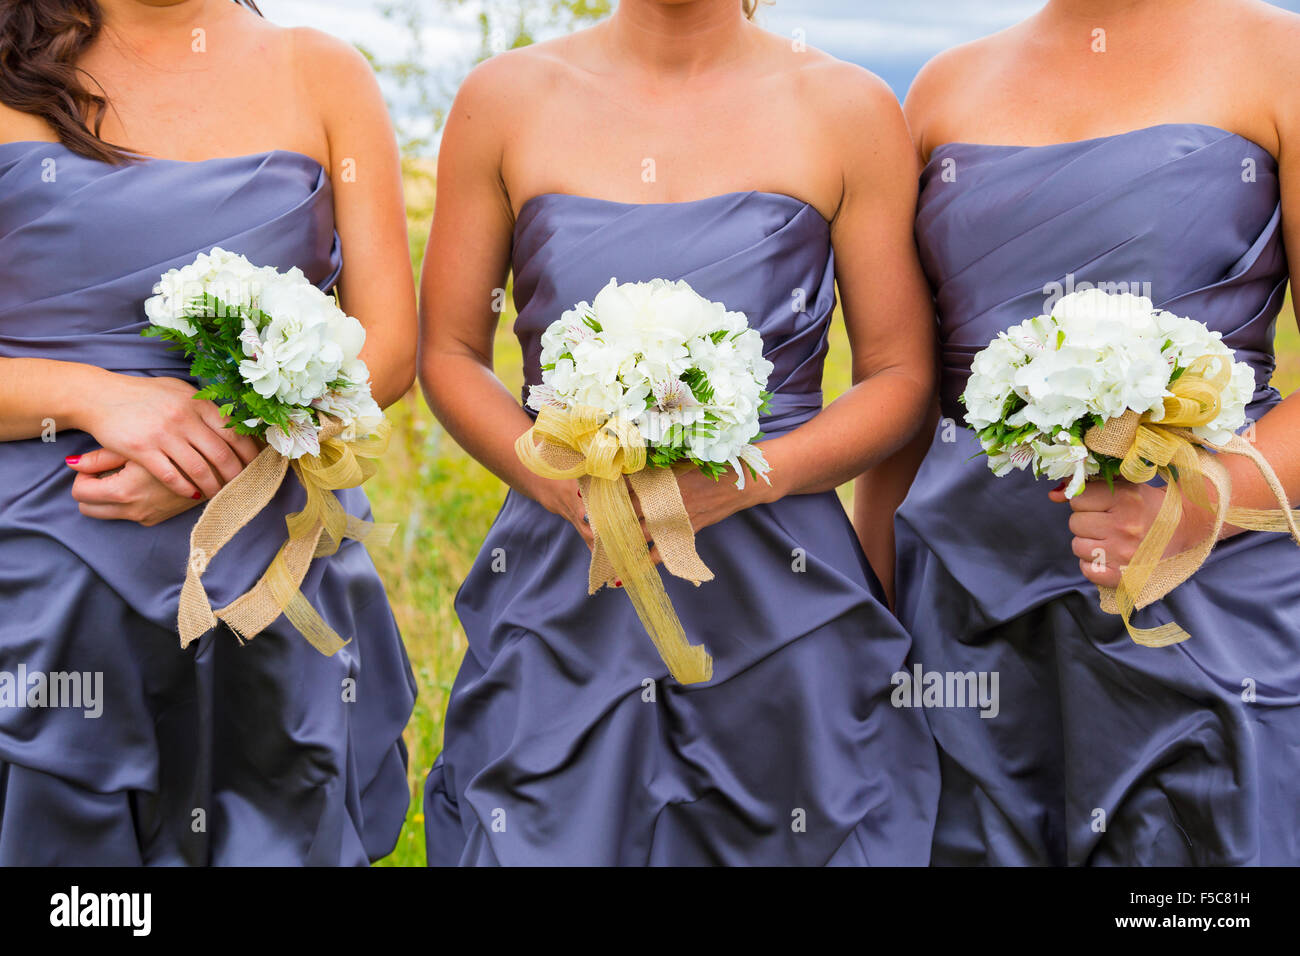 Bridesmaid holding flowers in a white bouquet on a wedding day. Stock Photo